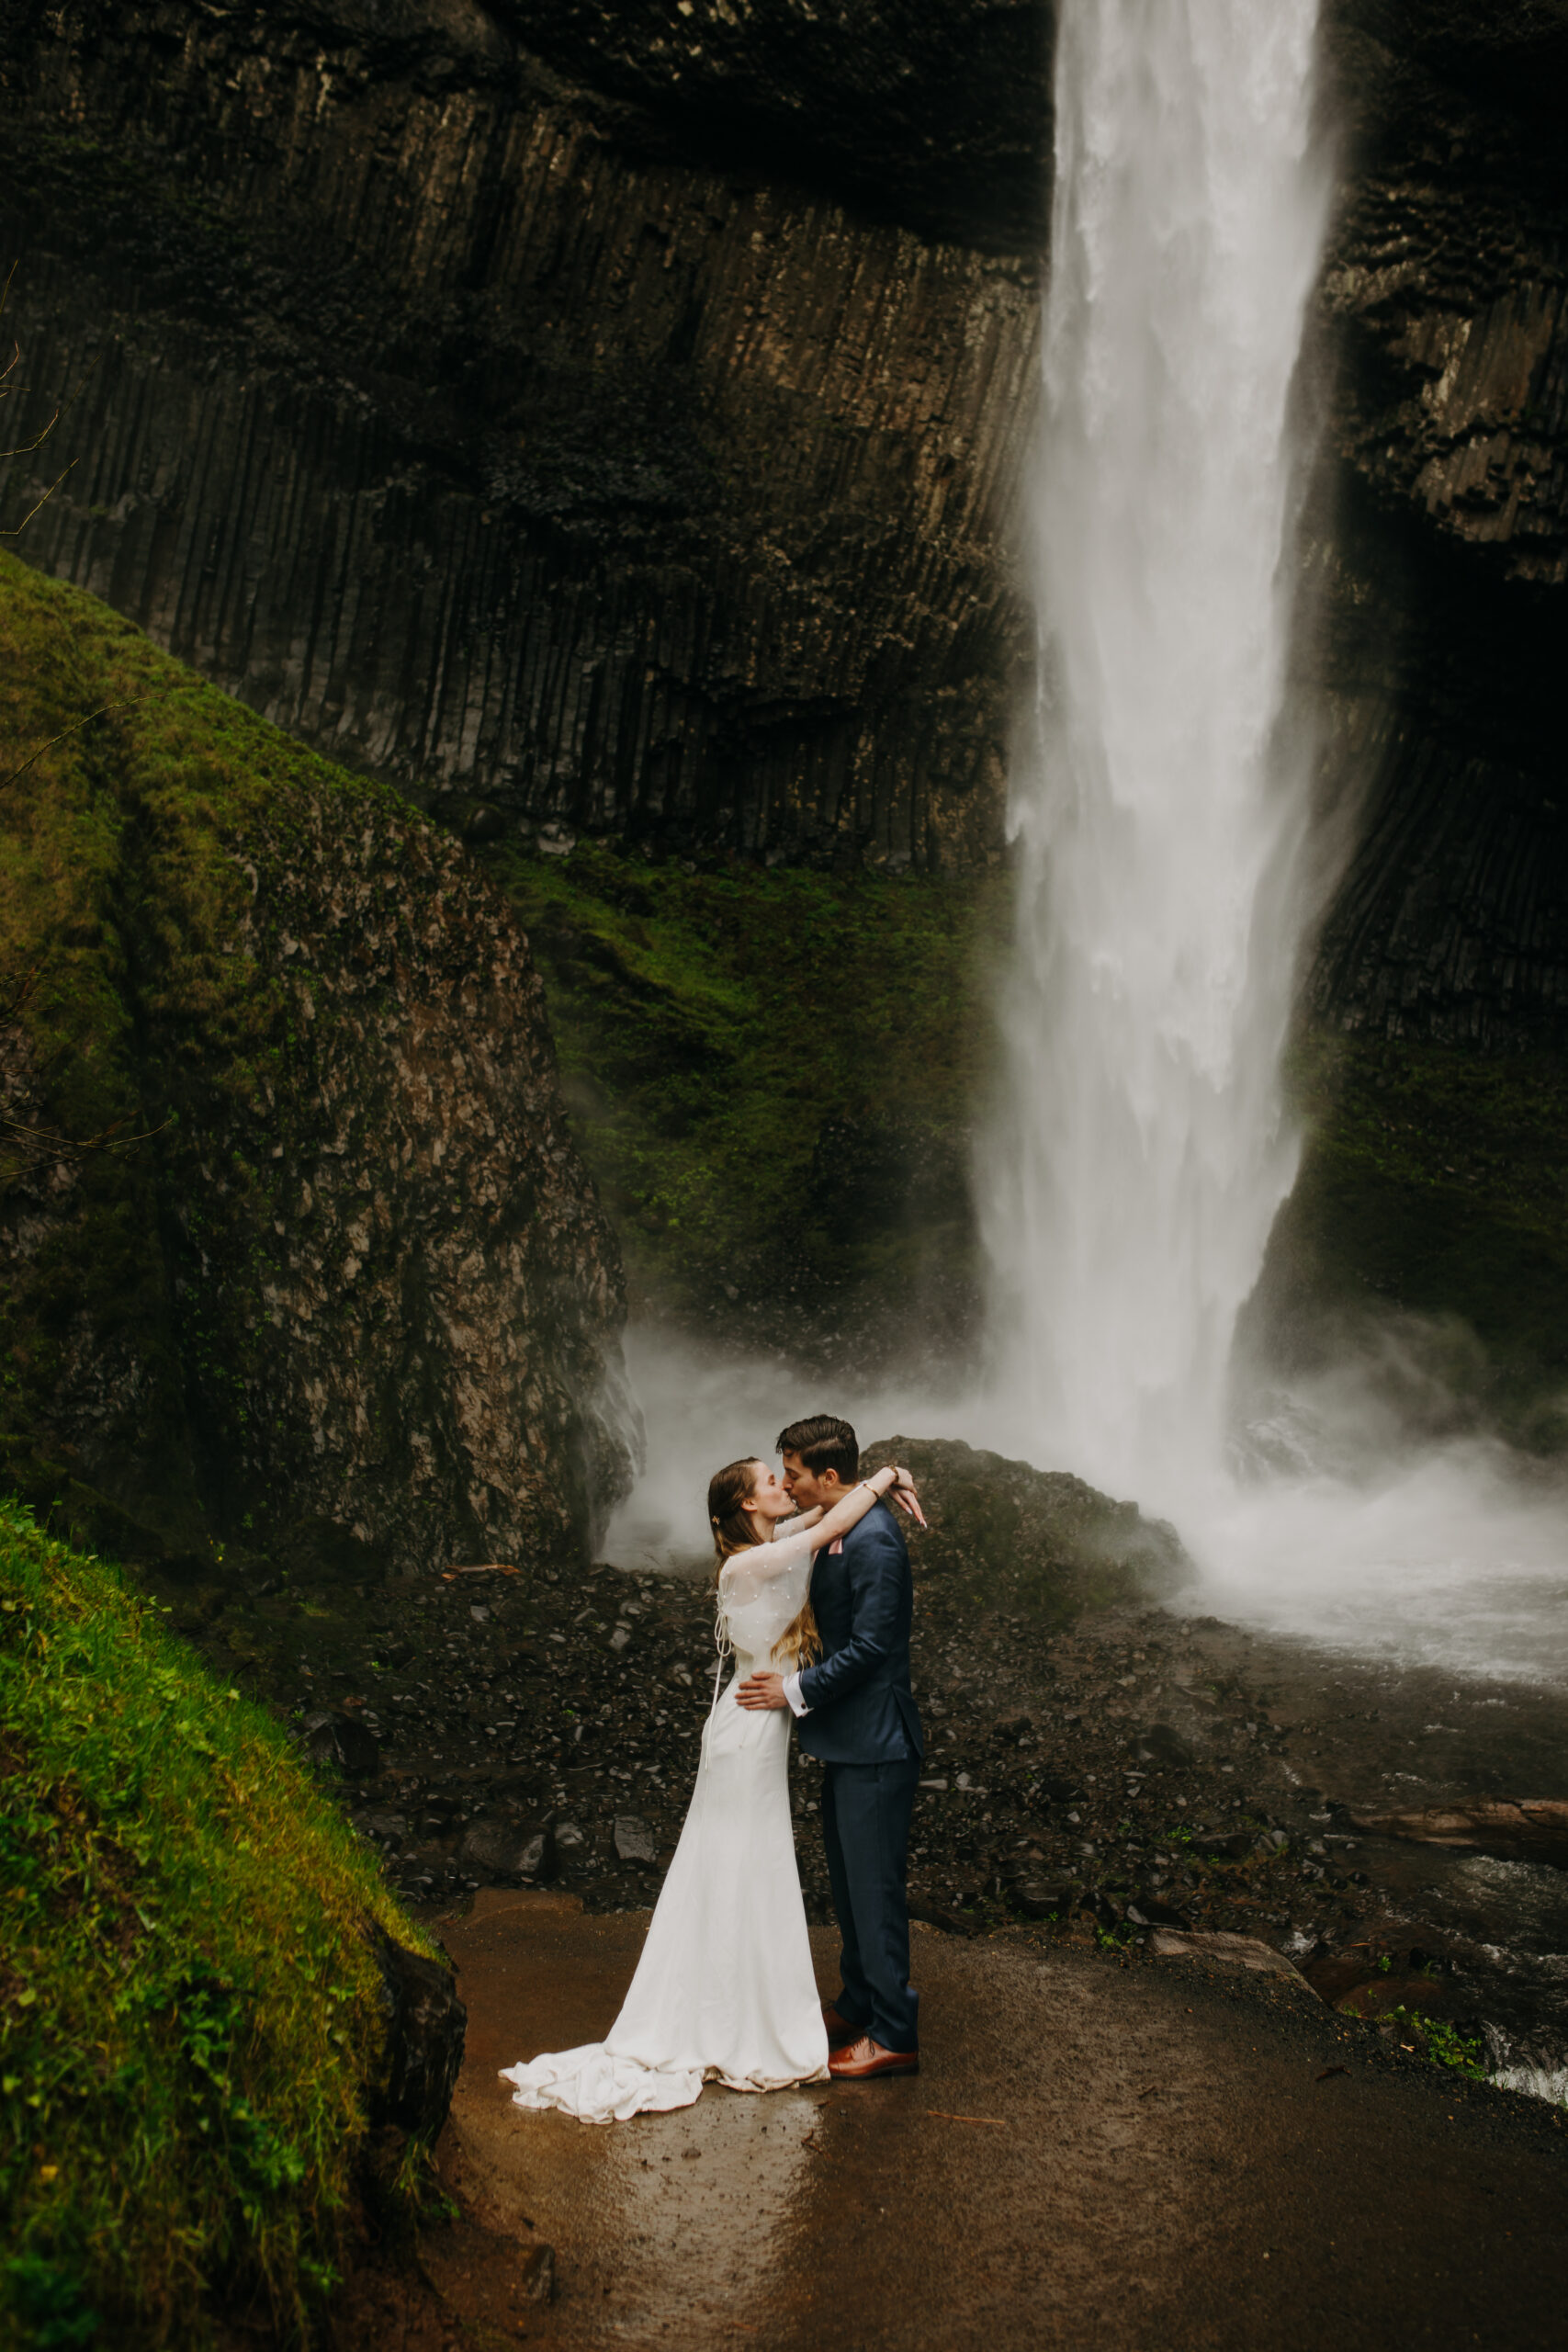 Woman and man embrace, woman is in wedding dress and man is in blue suit. They are standing outside in front of a waterfall. Latourell Falls elopement at Columbia River gorge.